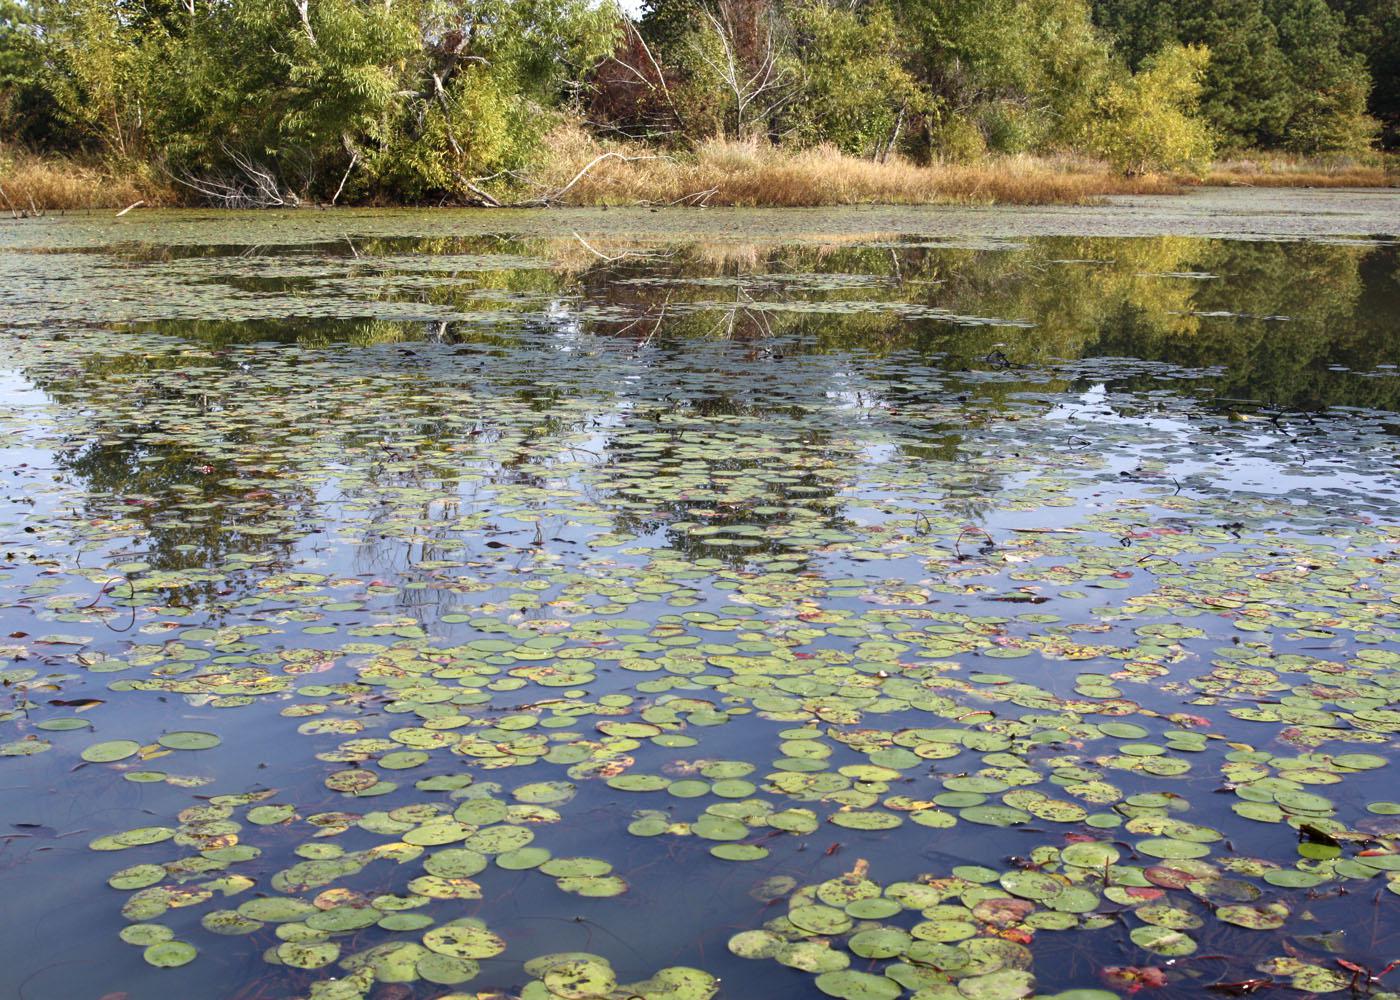 This shallow pond is infested with watershield, an aquatic plant that spreads rapidly and is difficult to control once established. (Photo submitted)